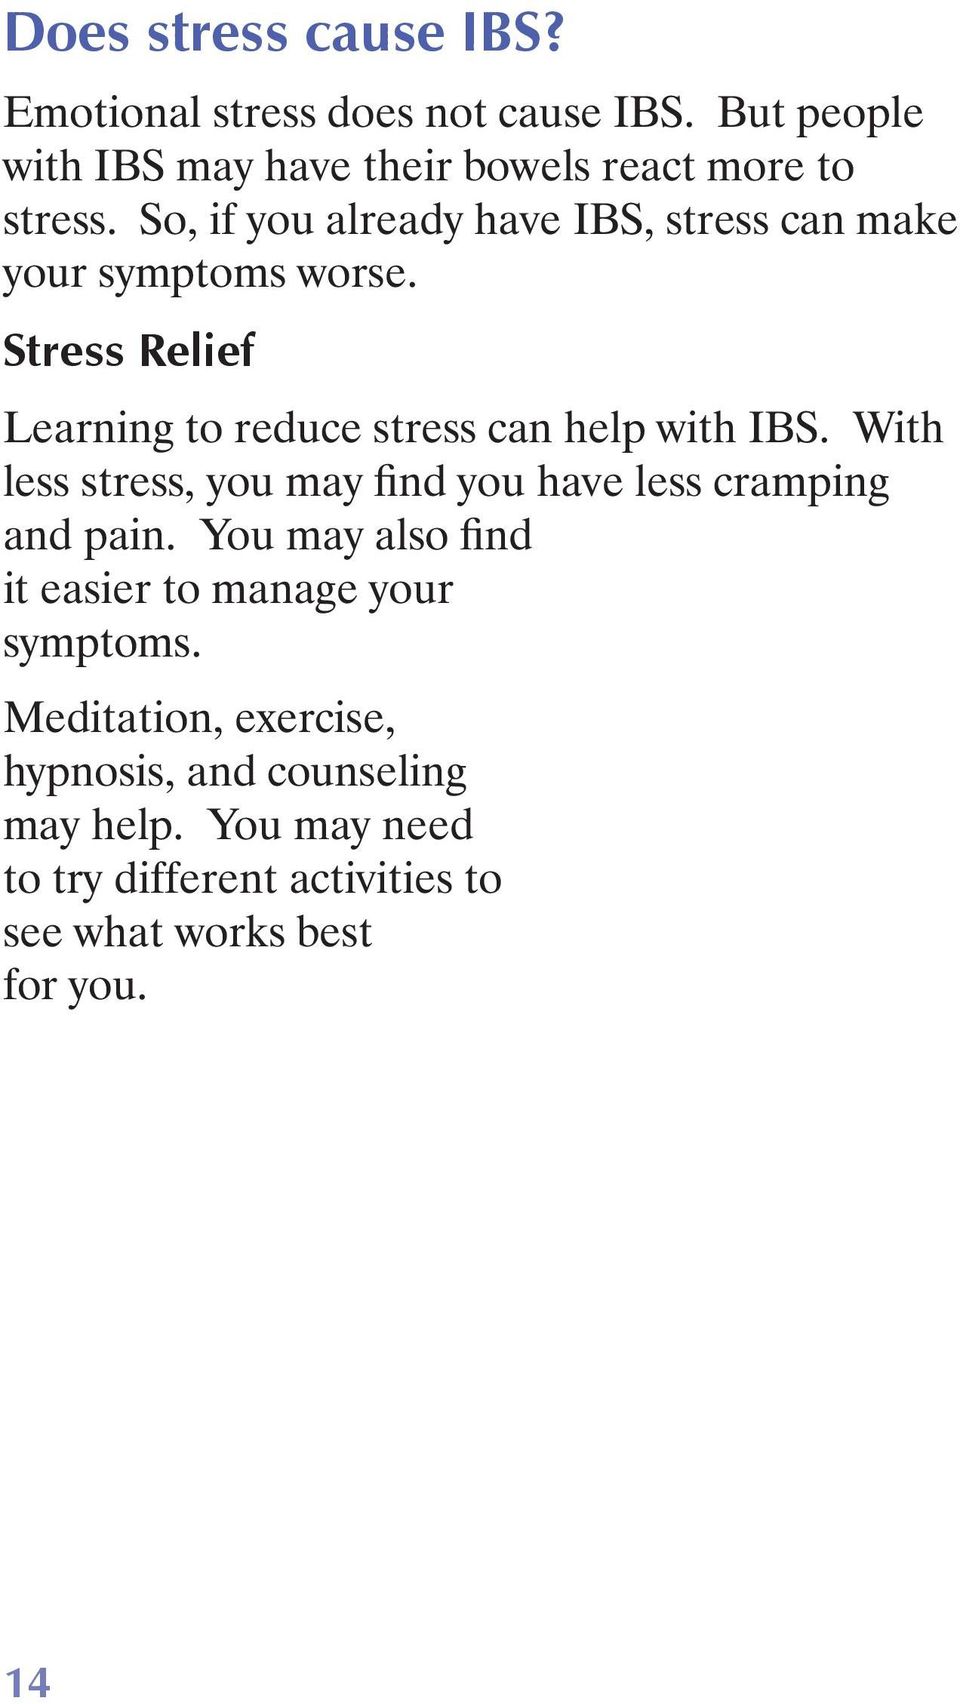 With less stress, you may find you have less cramping and pain. You may also find it easier to manage your symptoms.